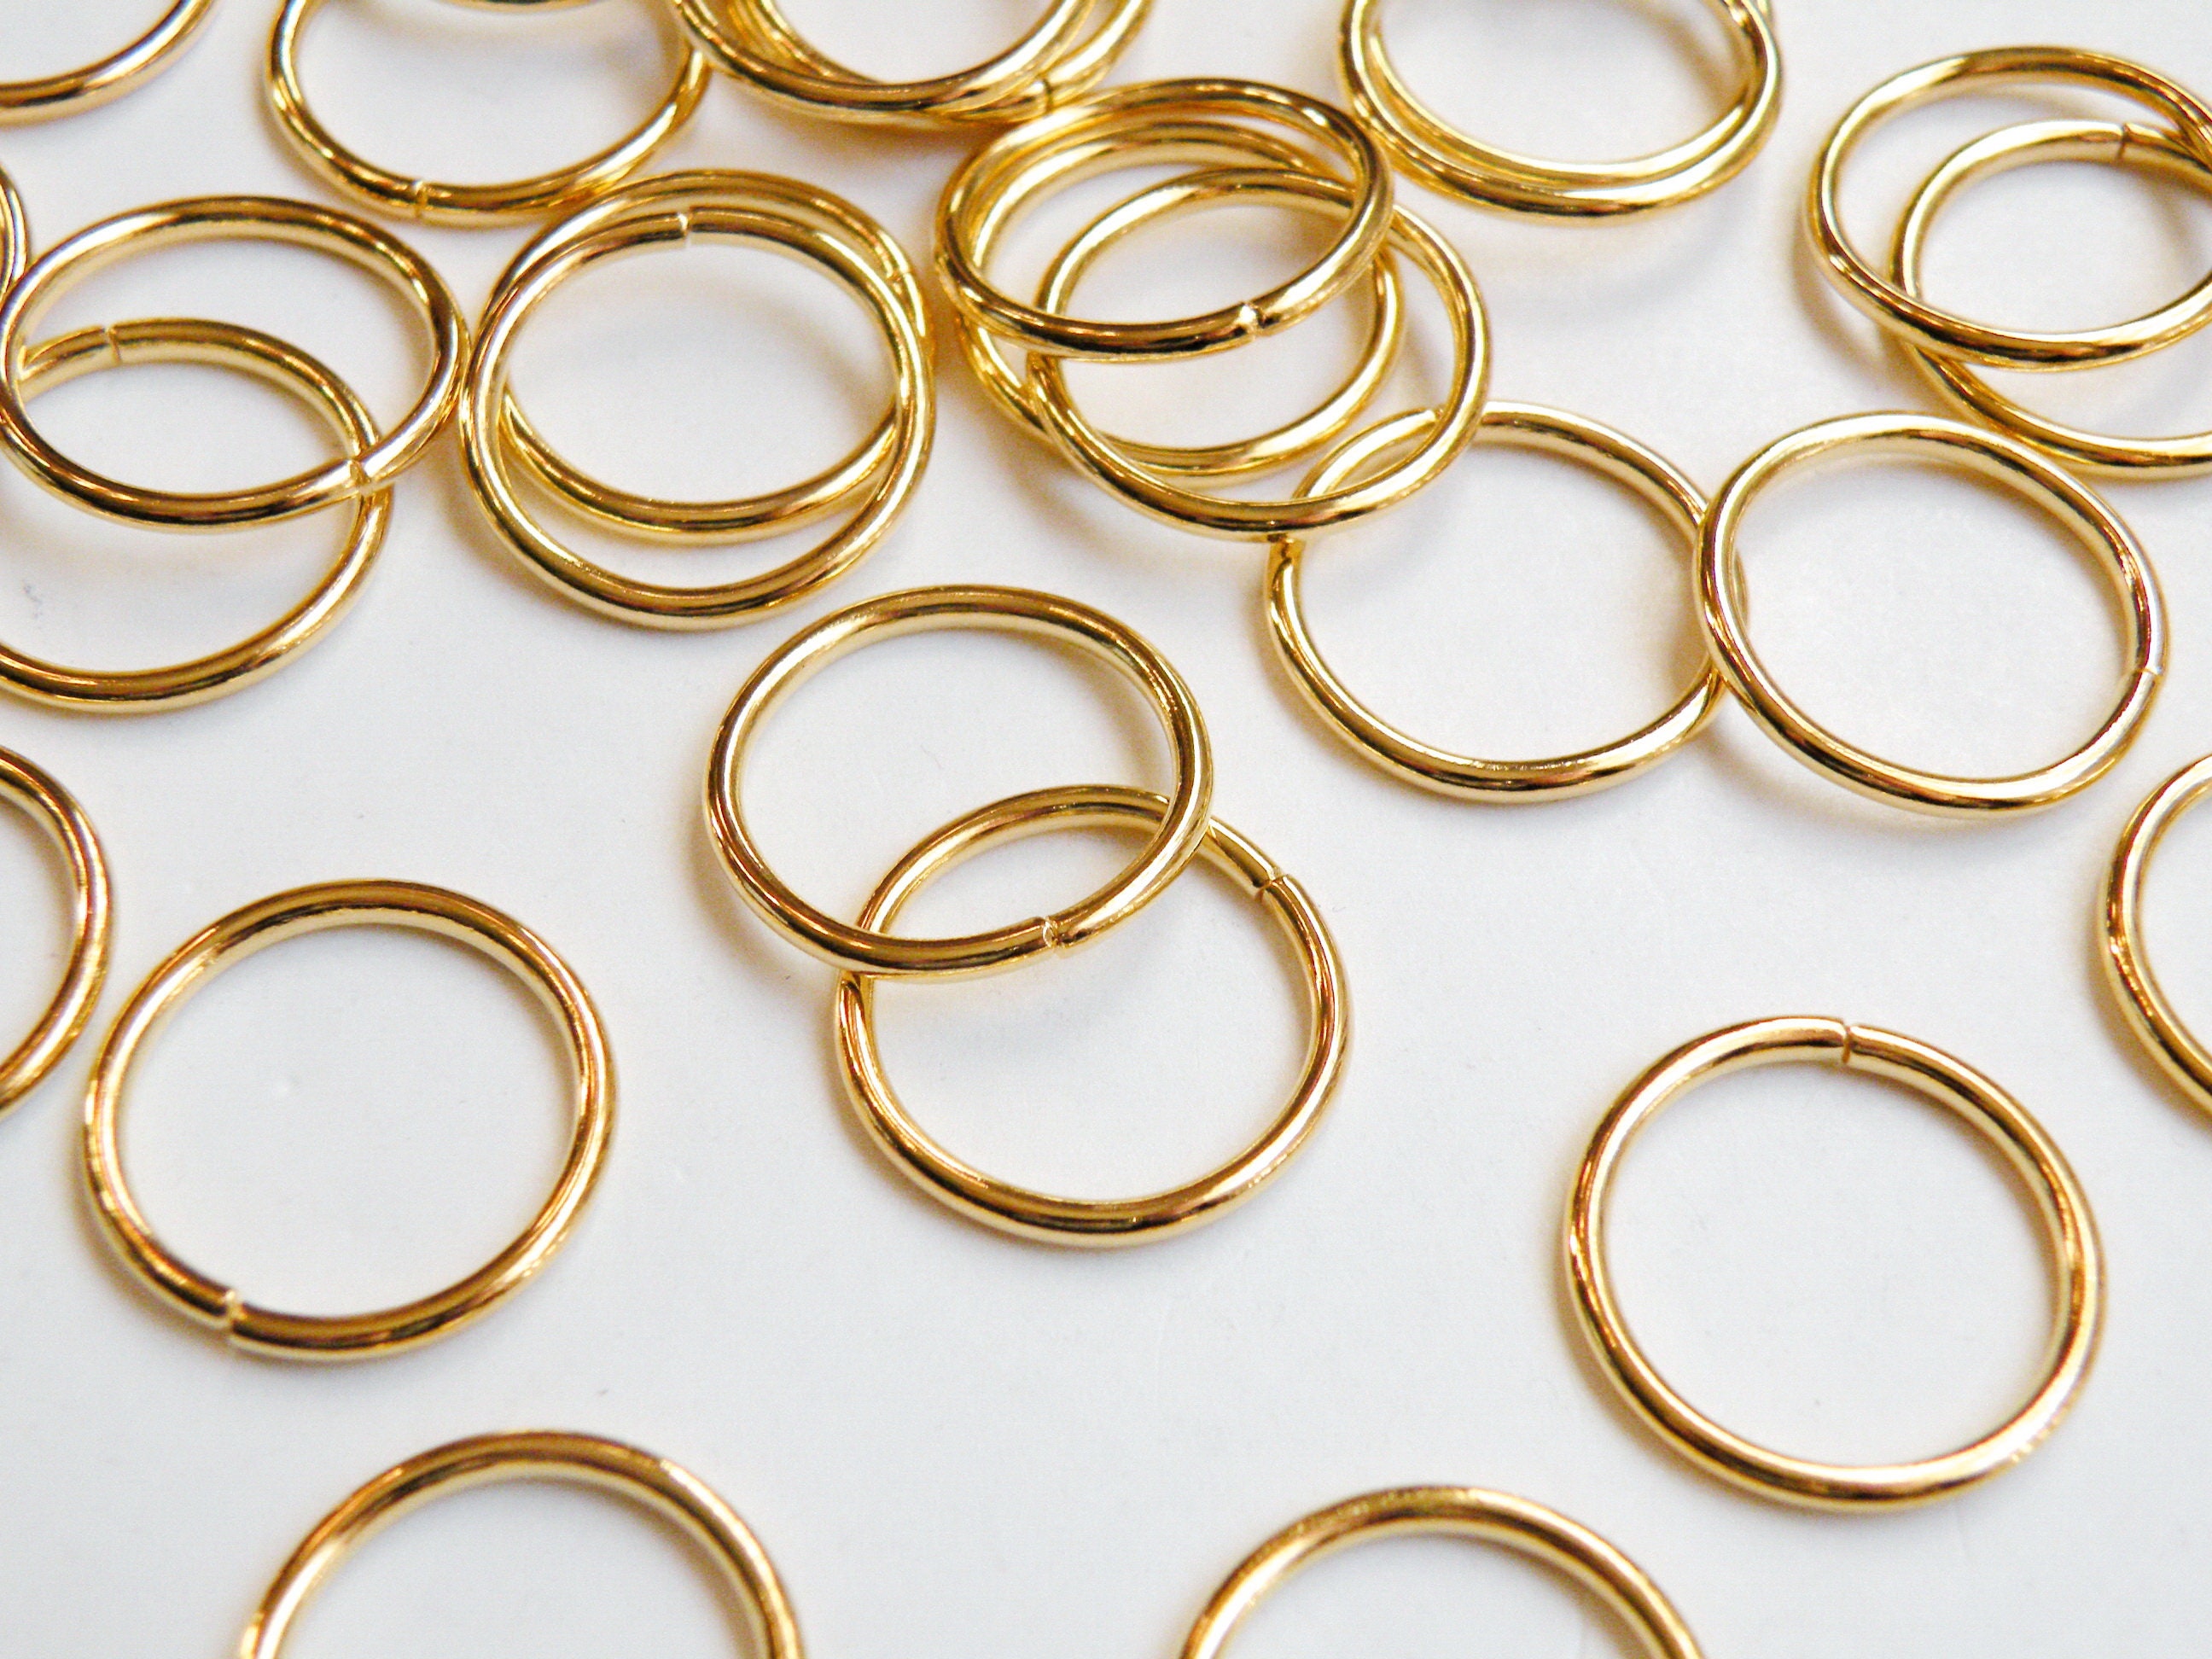 O Ring Spring Gate Ring Metal O Rings Spring Ring Clasp Push Gate Gold  Silver Snap Hooks 18mm 25mm 35mm 40mm 45mm 47mm 60mm 72mm 